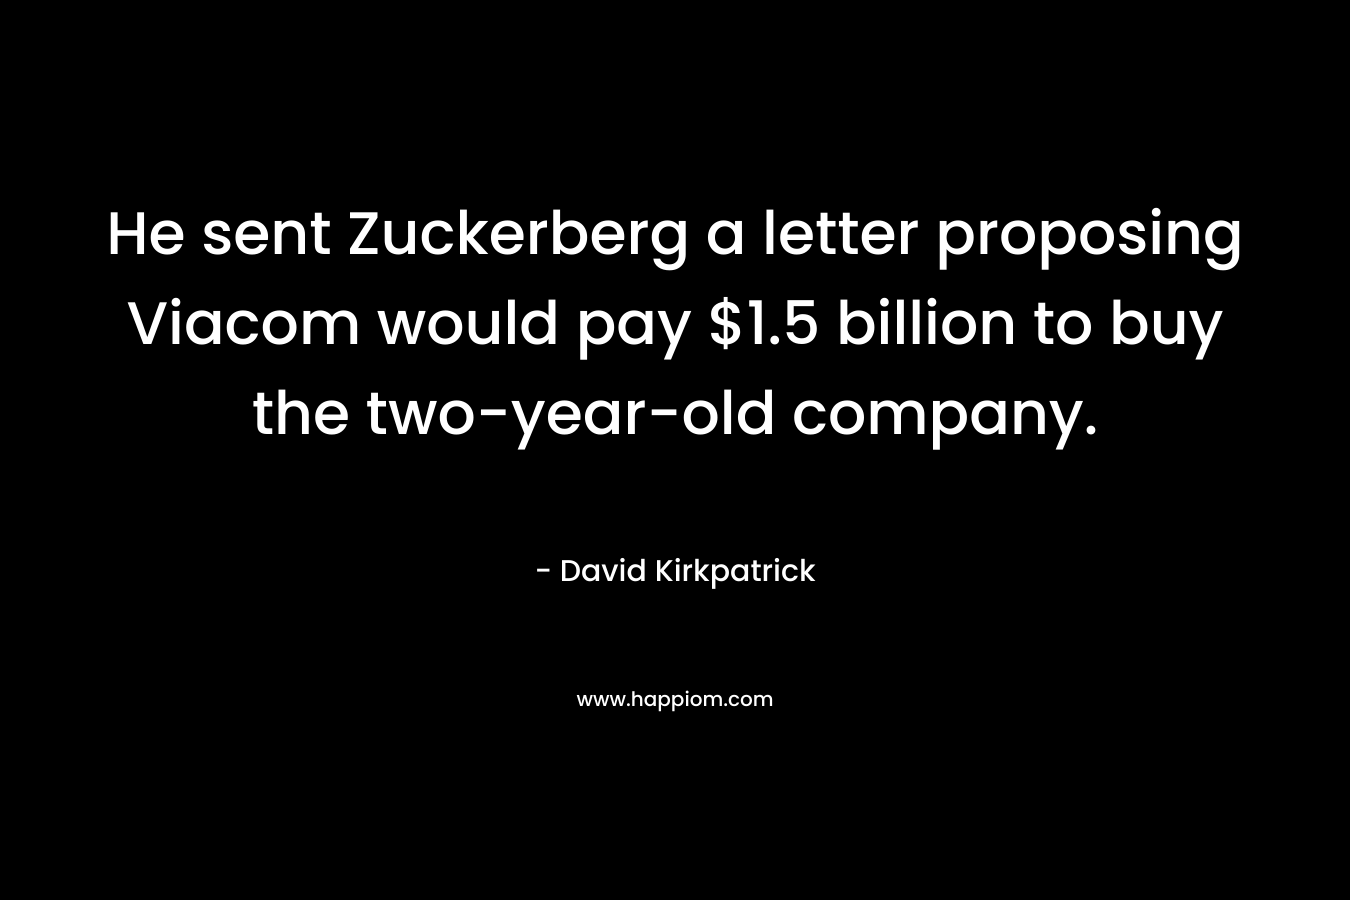 He sent Zuckerberg a letter proposing Viacom would pay $1.5 billion to buy the two-year-old company. – David Kirkpatrick